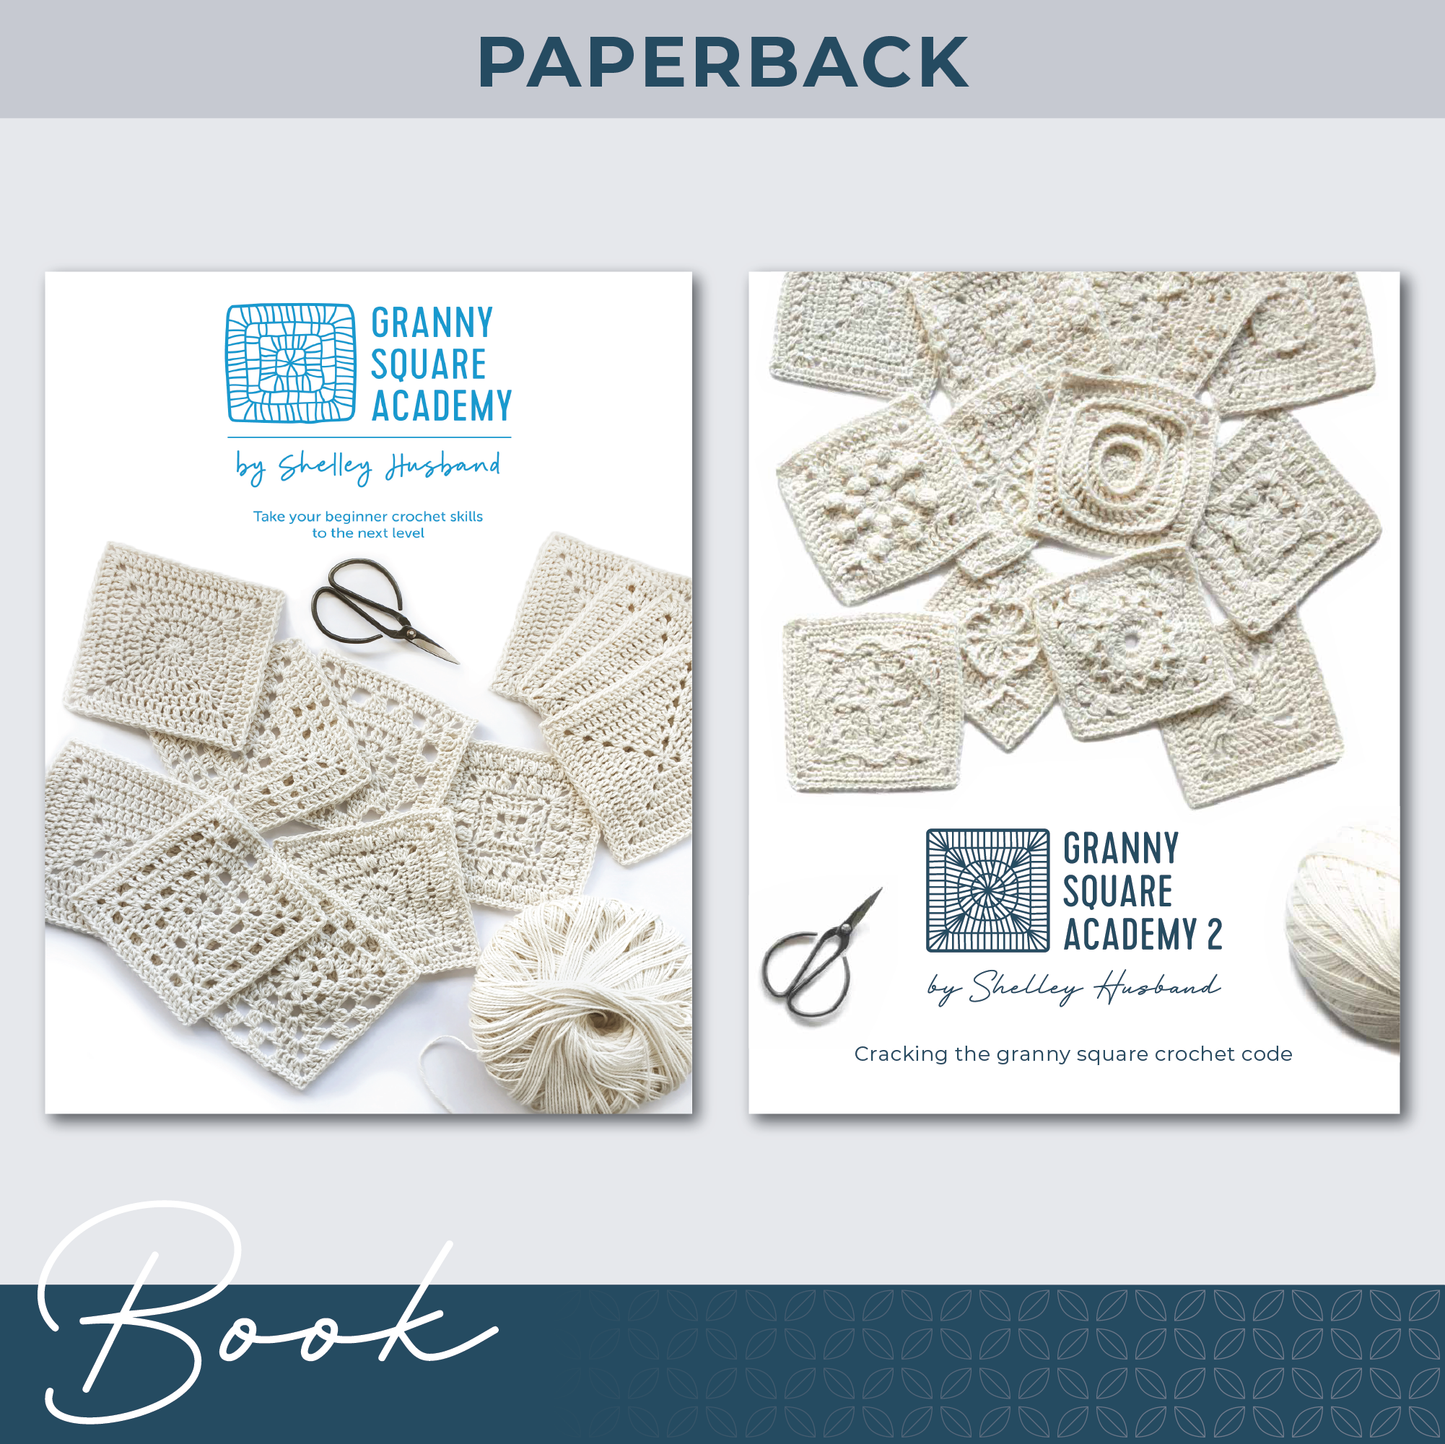 The front covers of both Granny Square Academy and Granny Square Academy 2. Words over the image say Paperback Books.